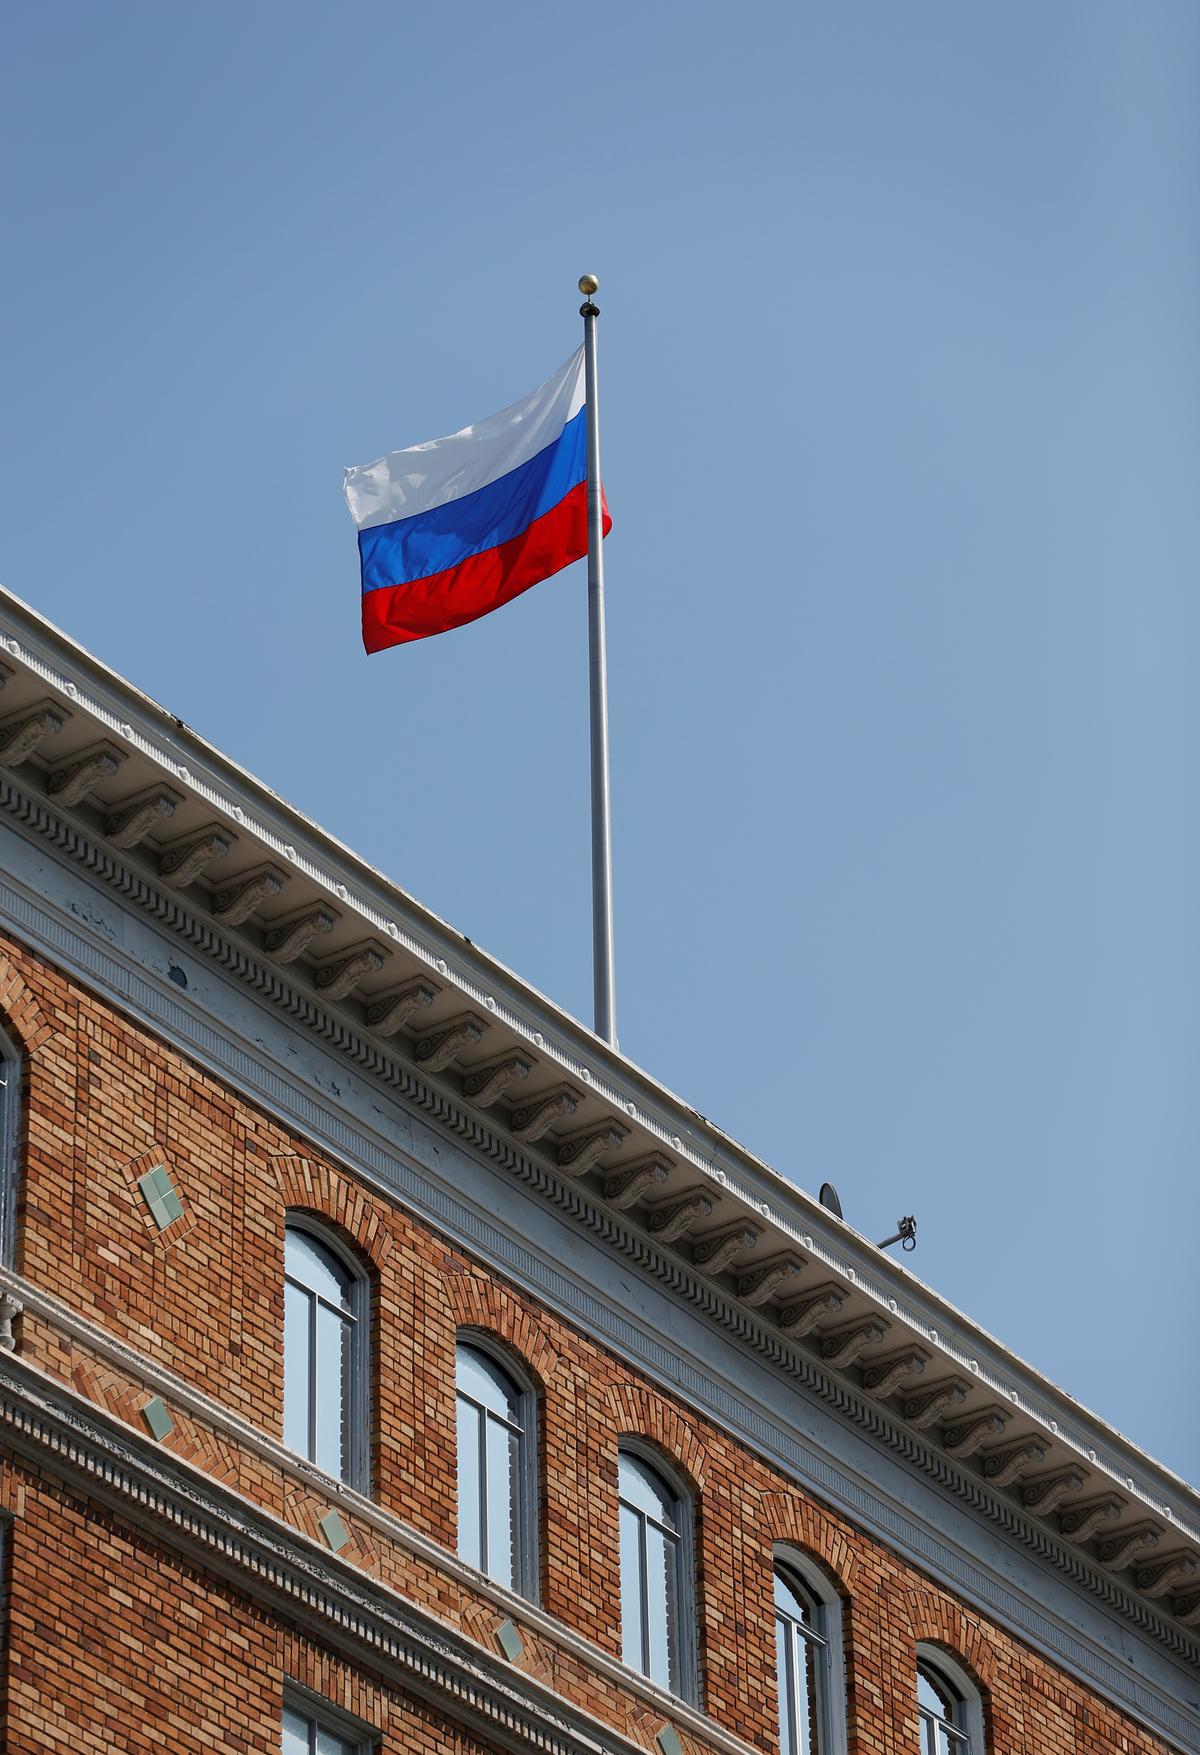 The Russian flag waves in the wind on the rooftop of the Consulate General of Russia in San Francisco, Calif. on Aug. 31, 2017. (REUTERS/Stephen Lam)